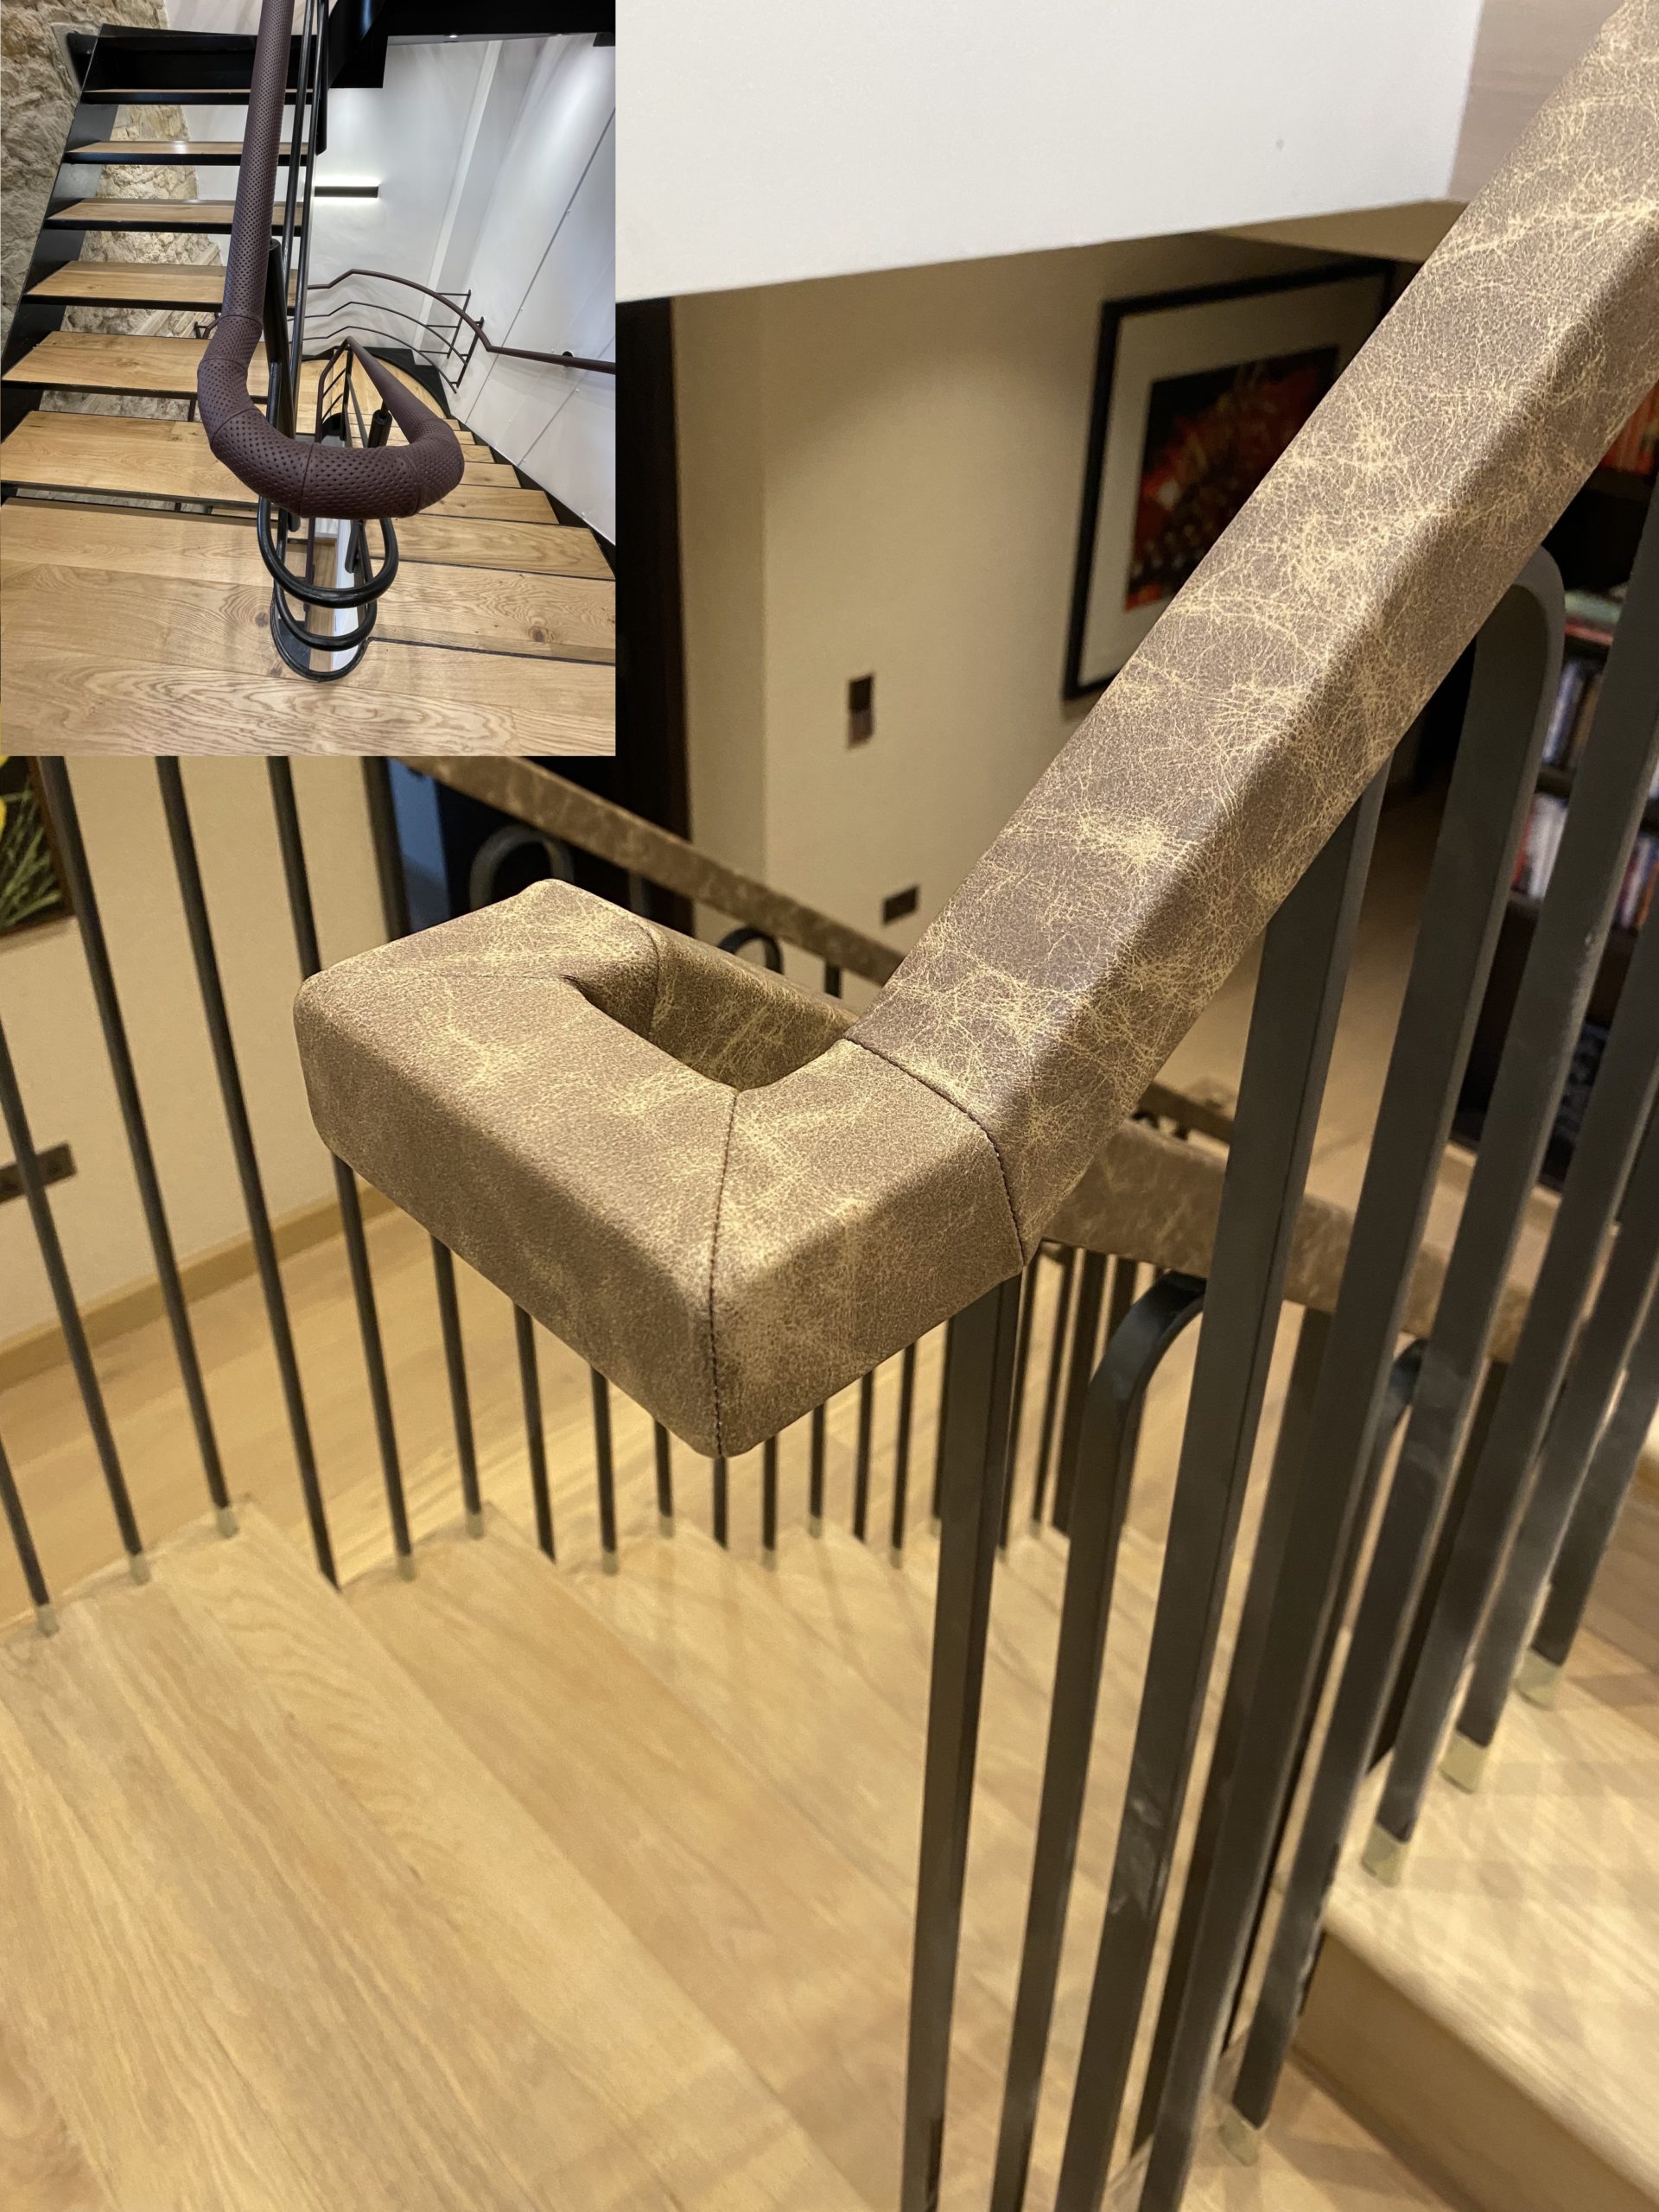 square handrail in leather